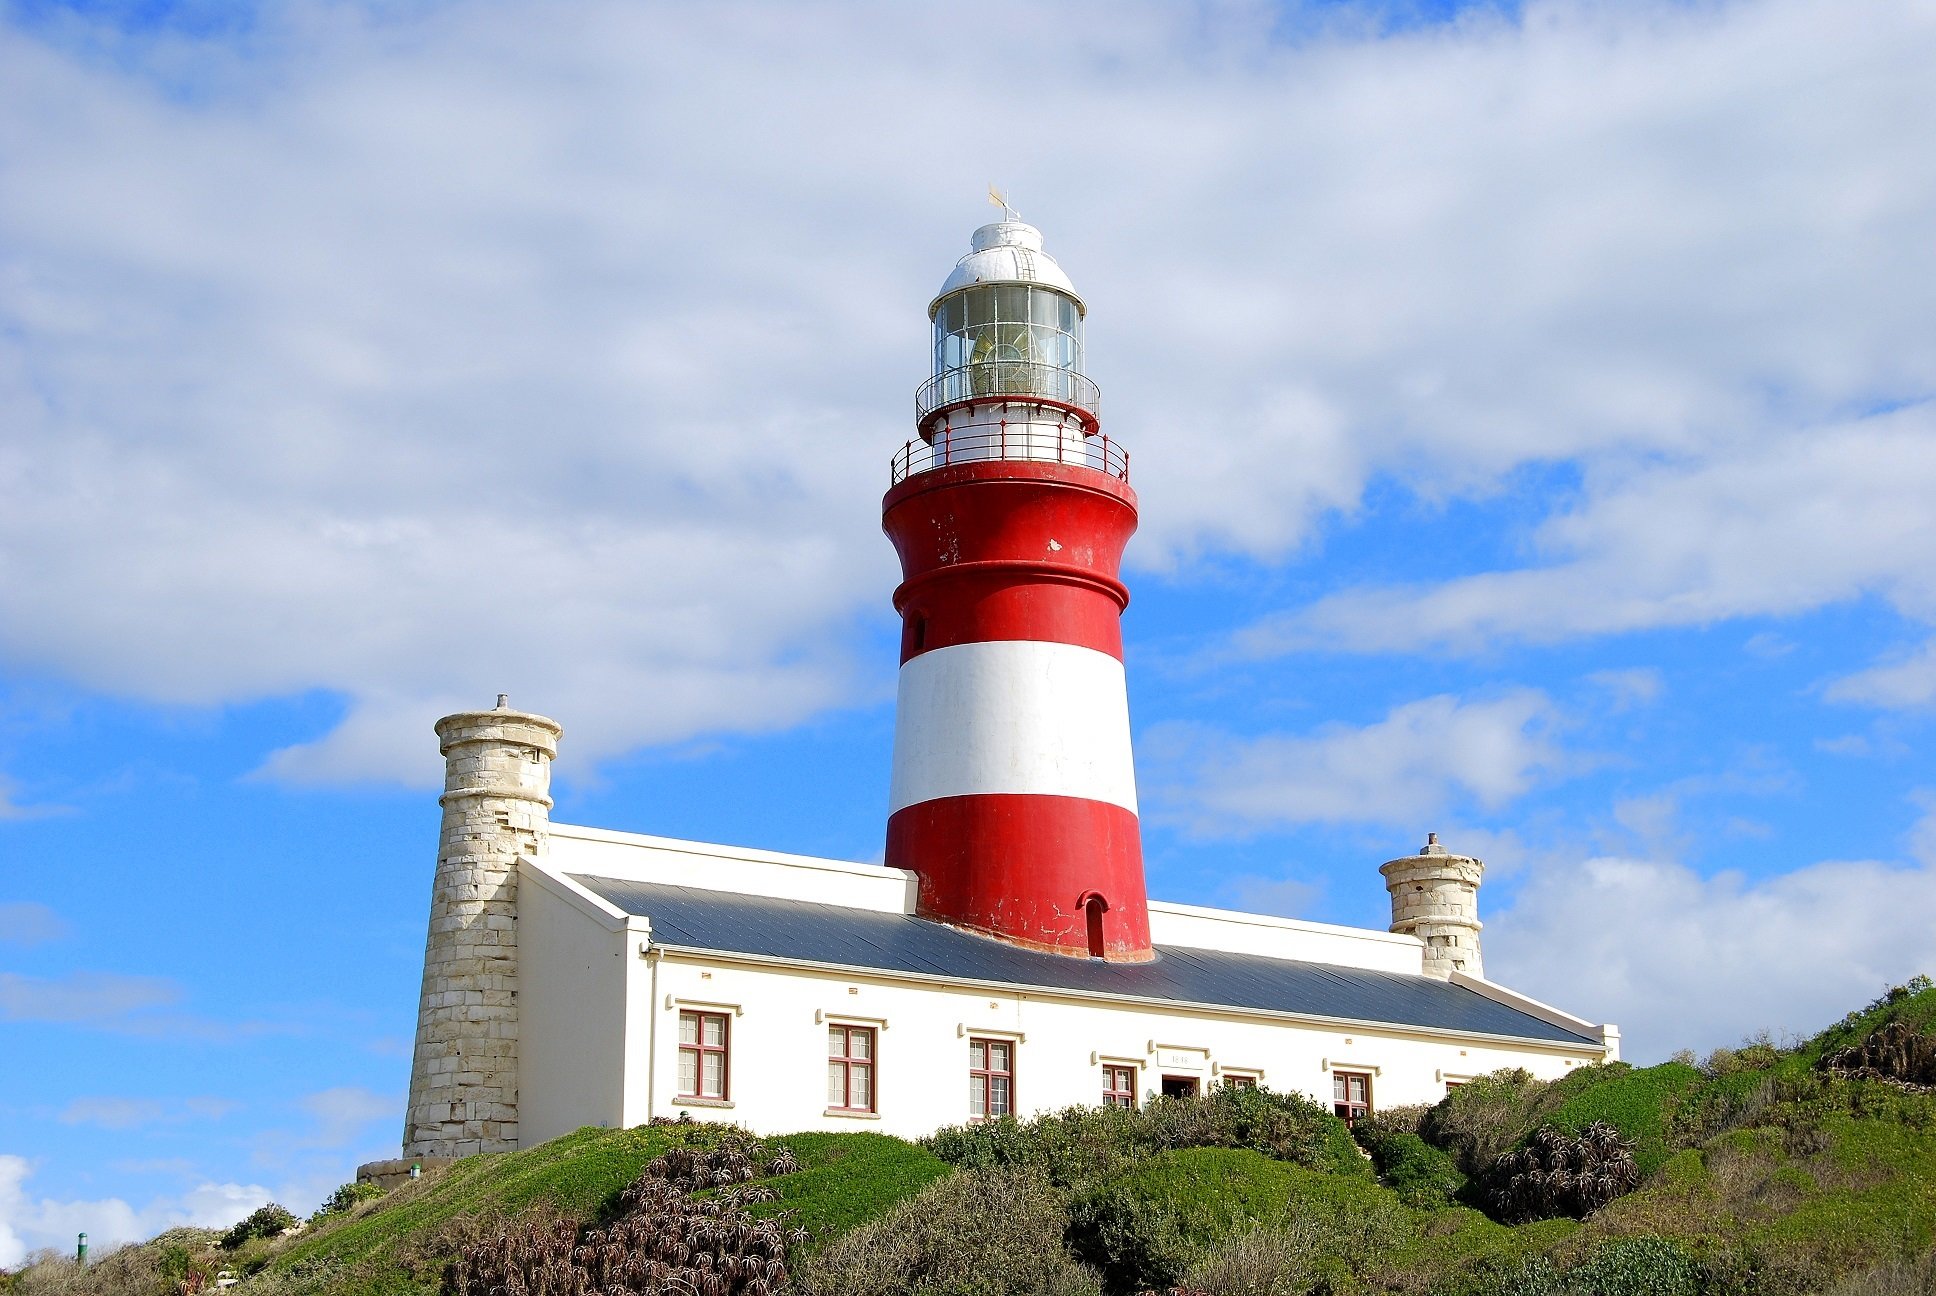 Cape Agulhas Lighthouse - The Southernmost Lighthous in Africa 